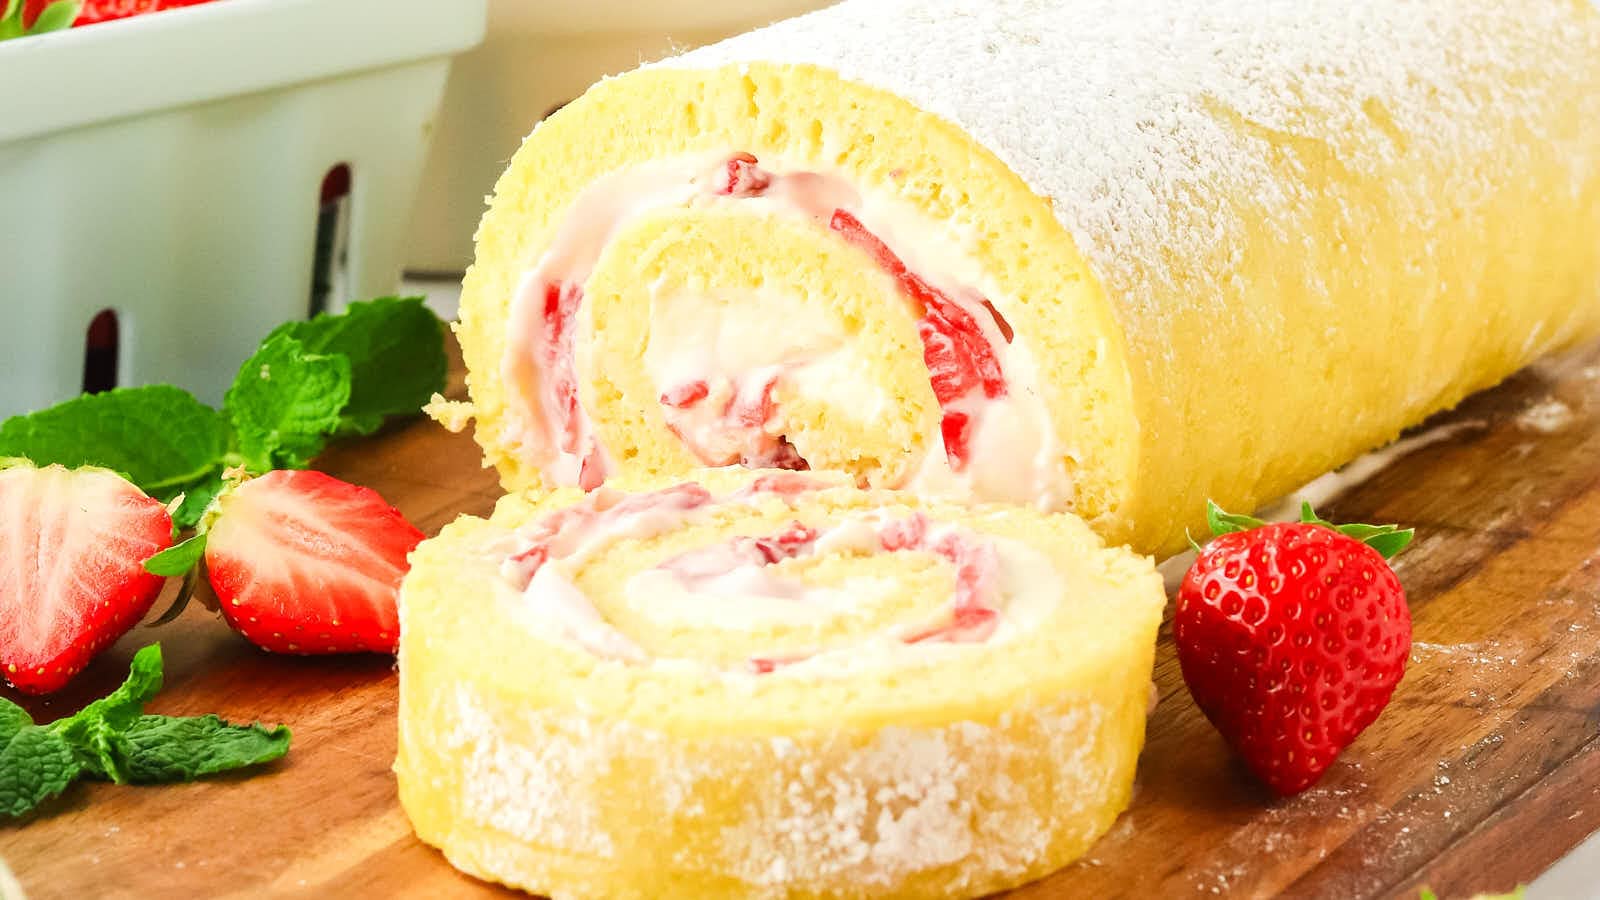 Strawberry Shortcake Roll recipe by Cheerful Cook.